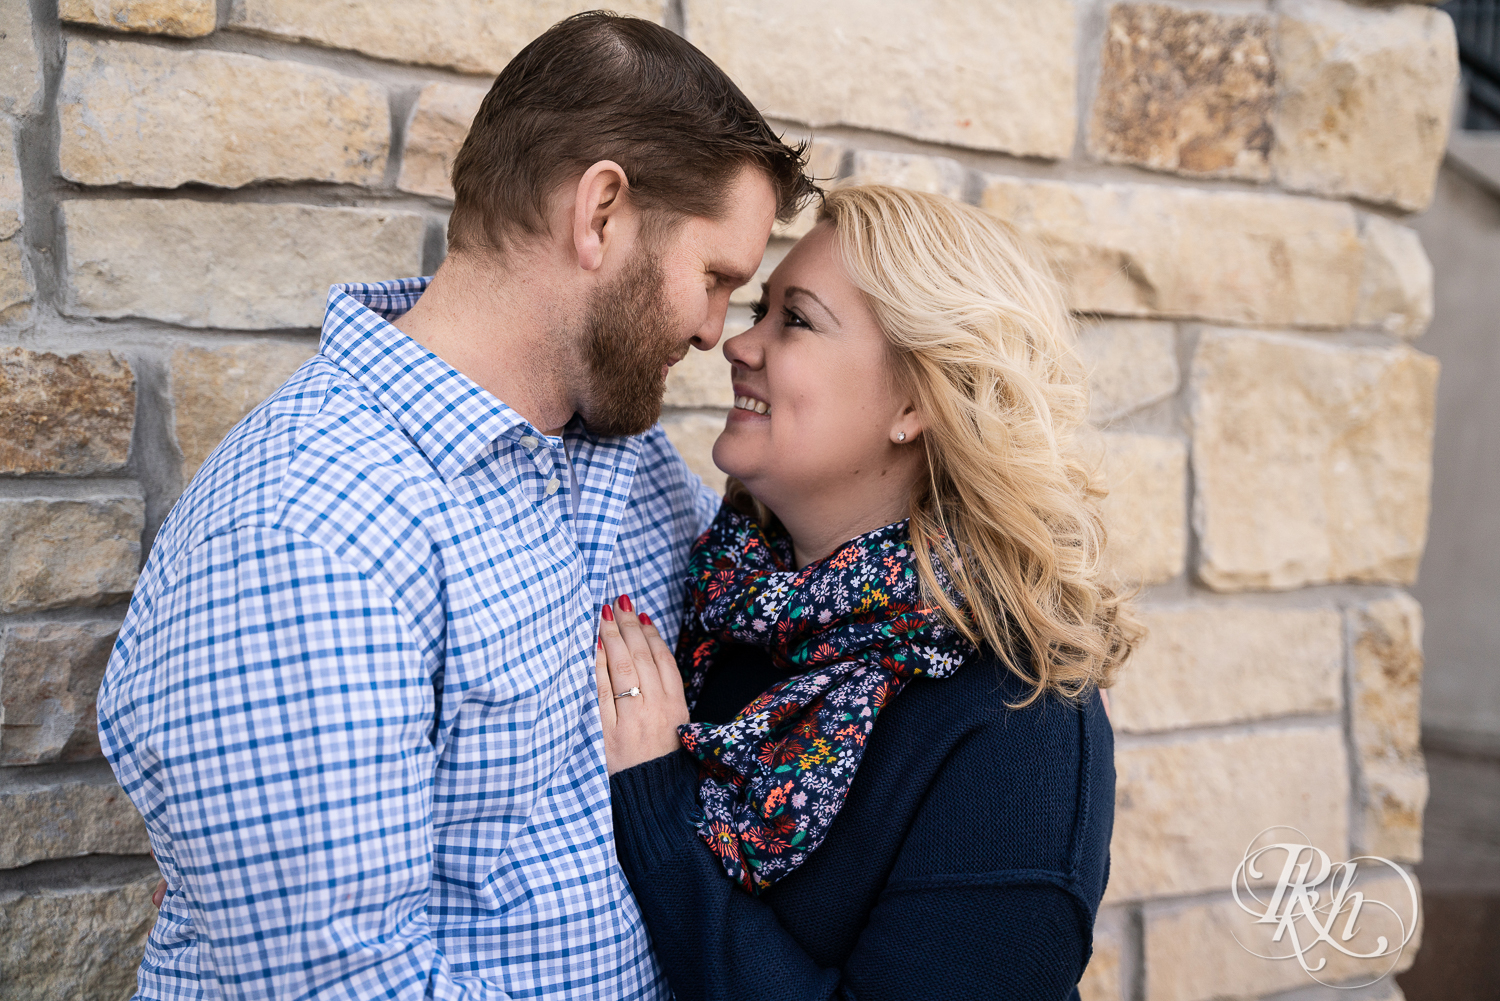 Blond woman and bearded man smile against brick wall in Stillwater, Minnesota.